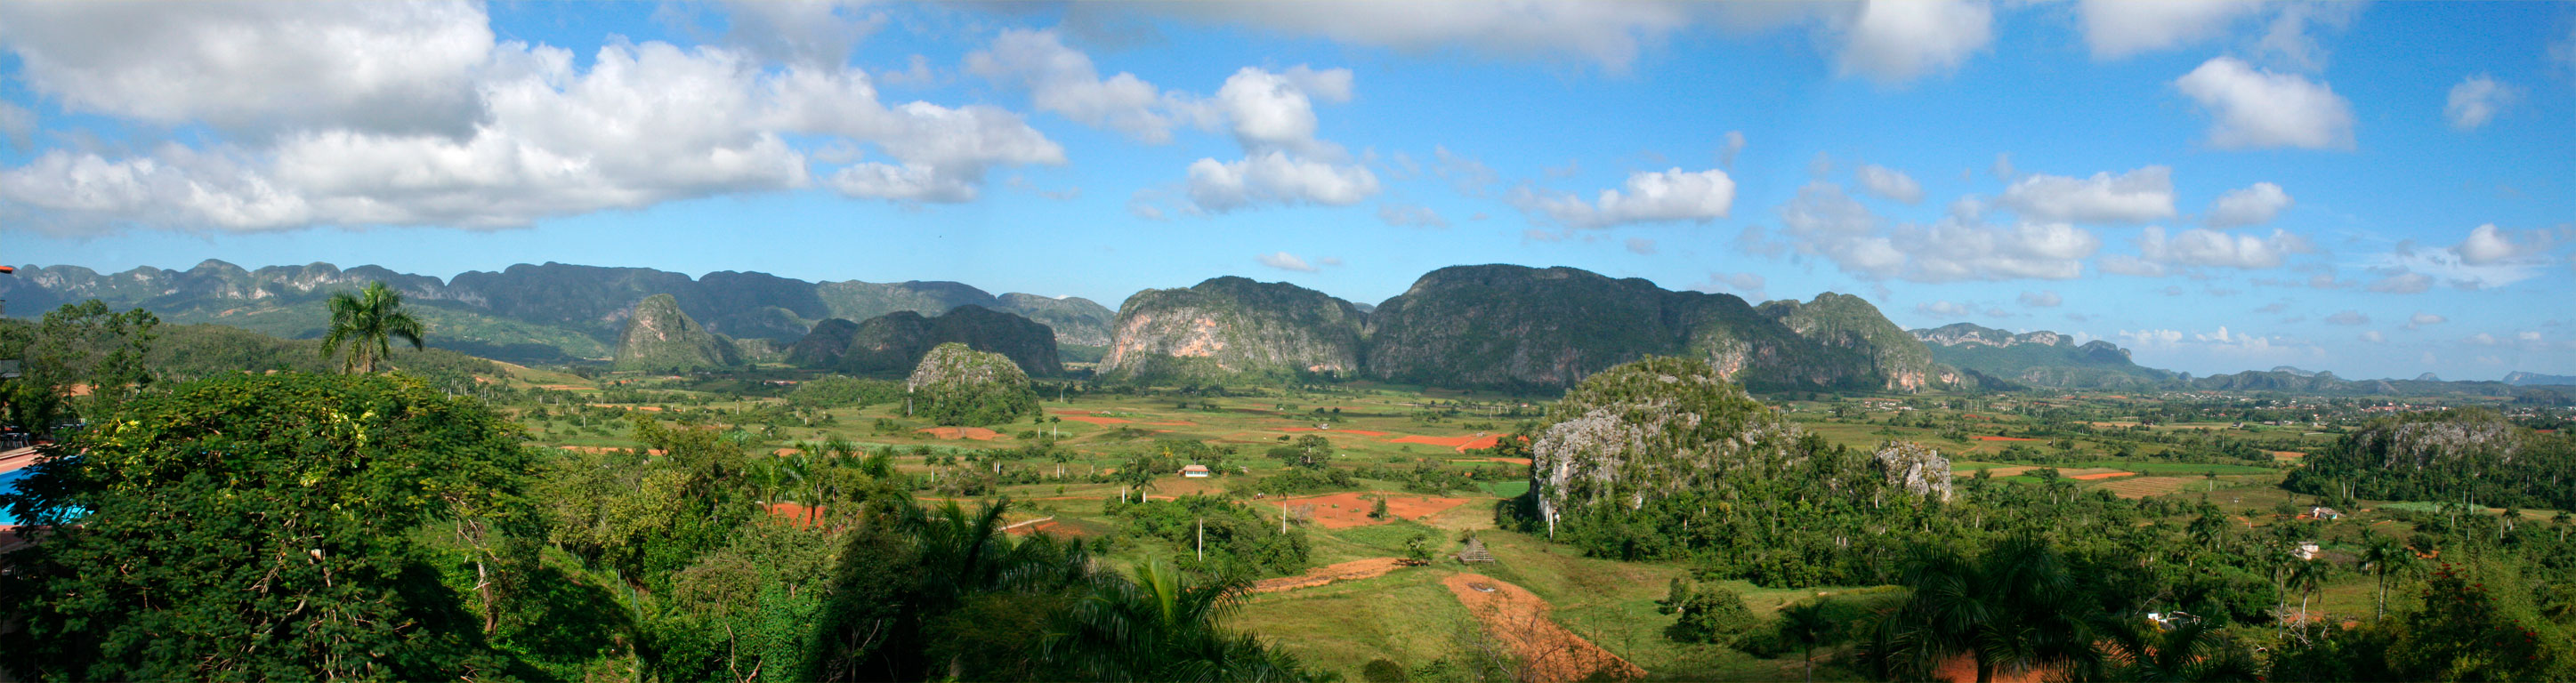 The one and only panorama we took on this trip, of the <em>mogotes</em> in the Viñales valley.<br />(composite of 3 photographs)